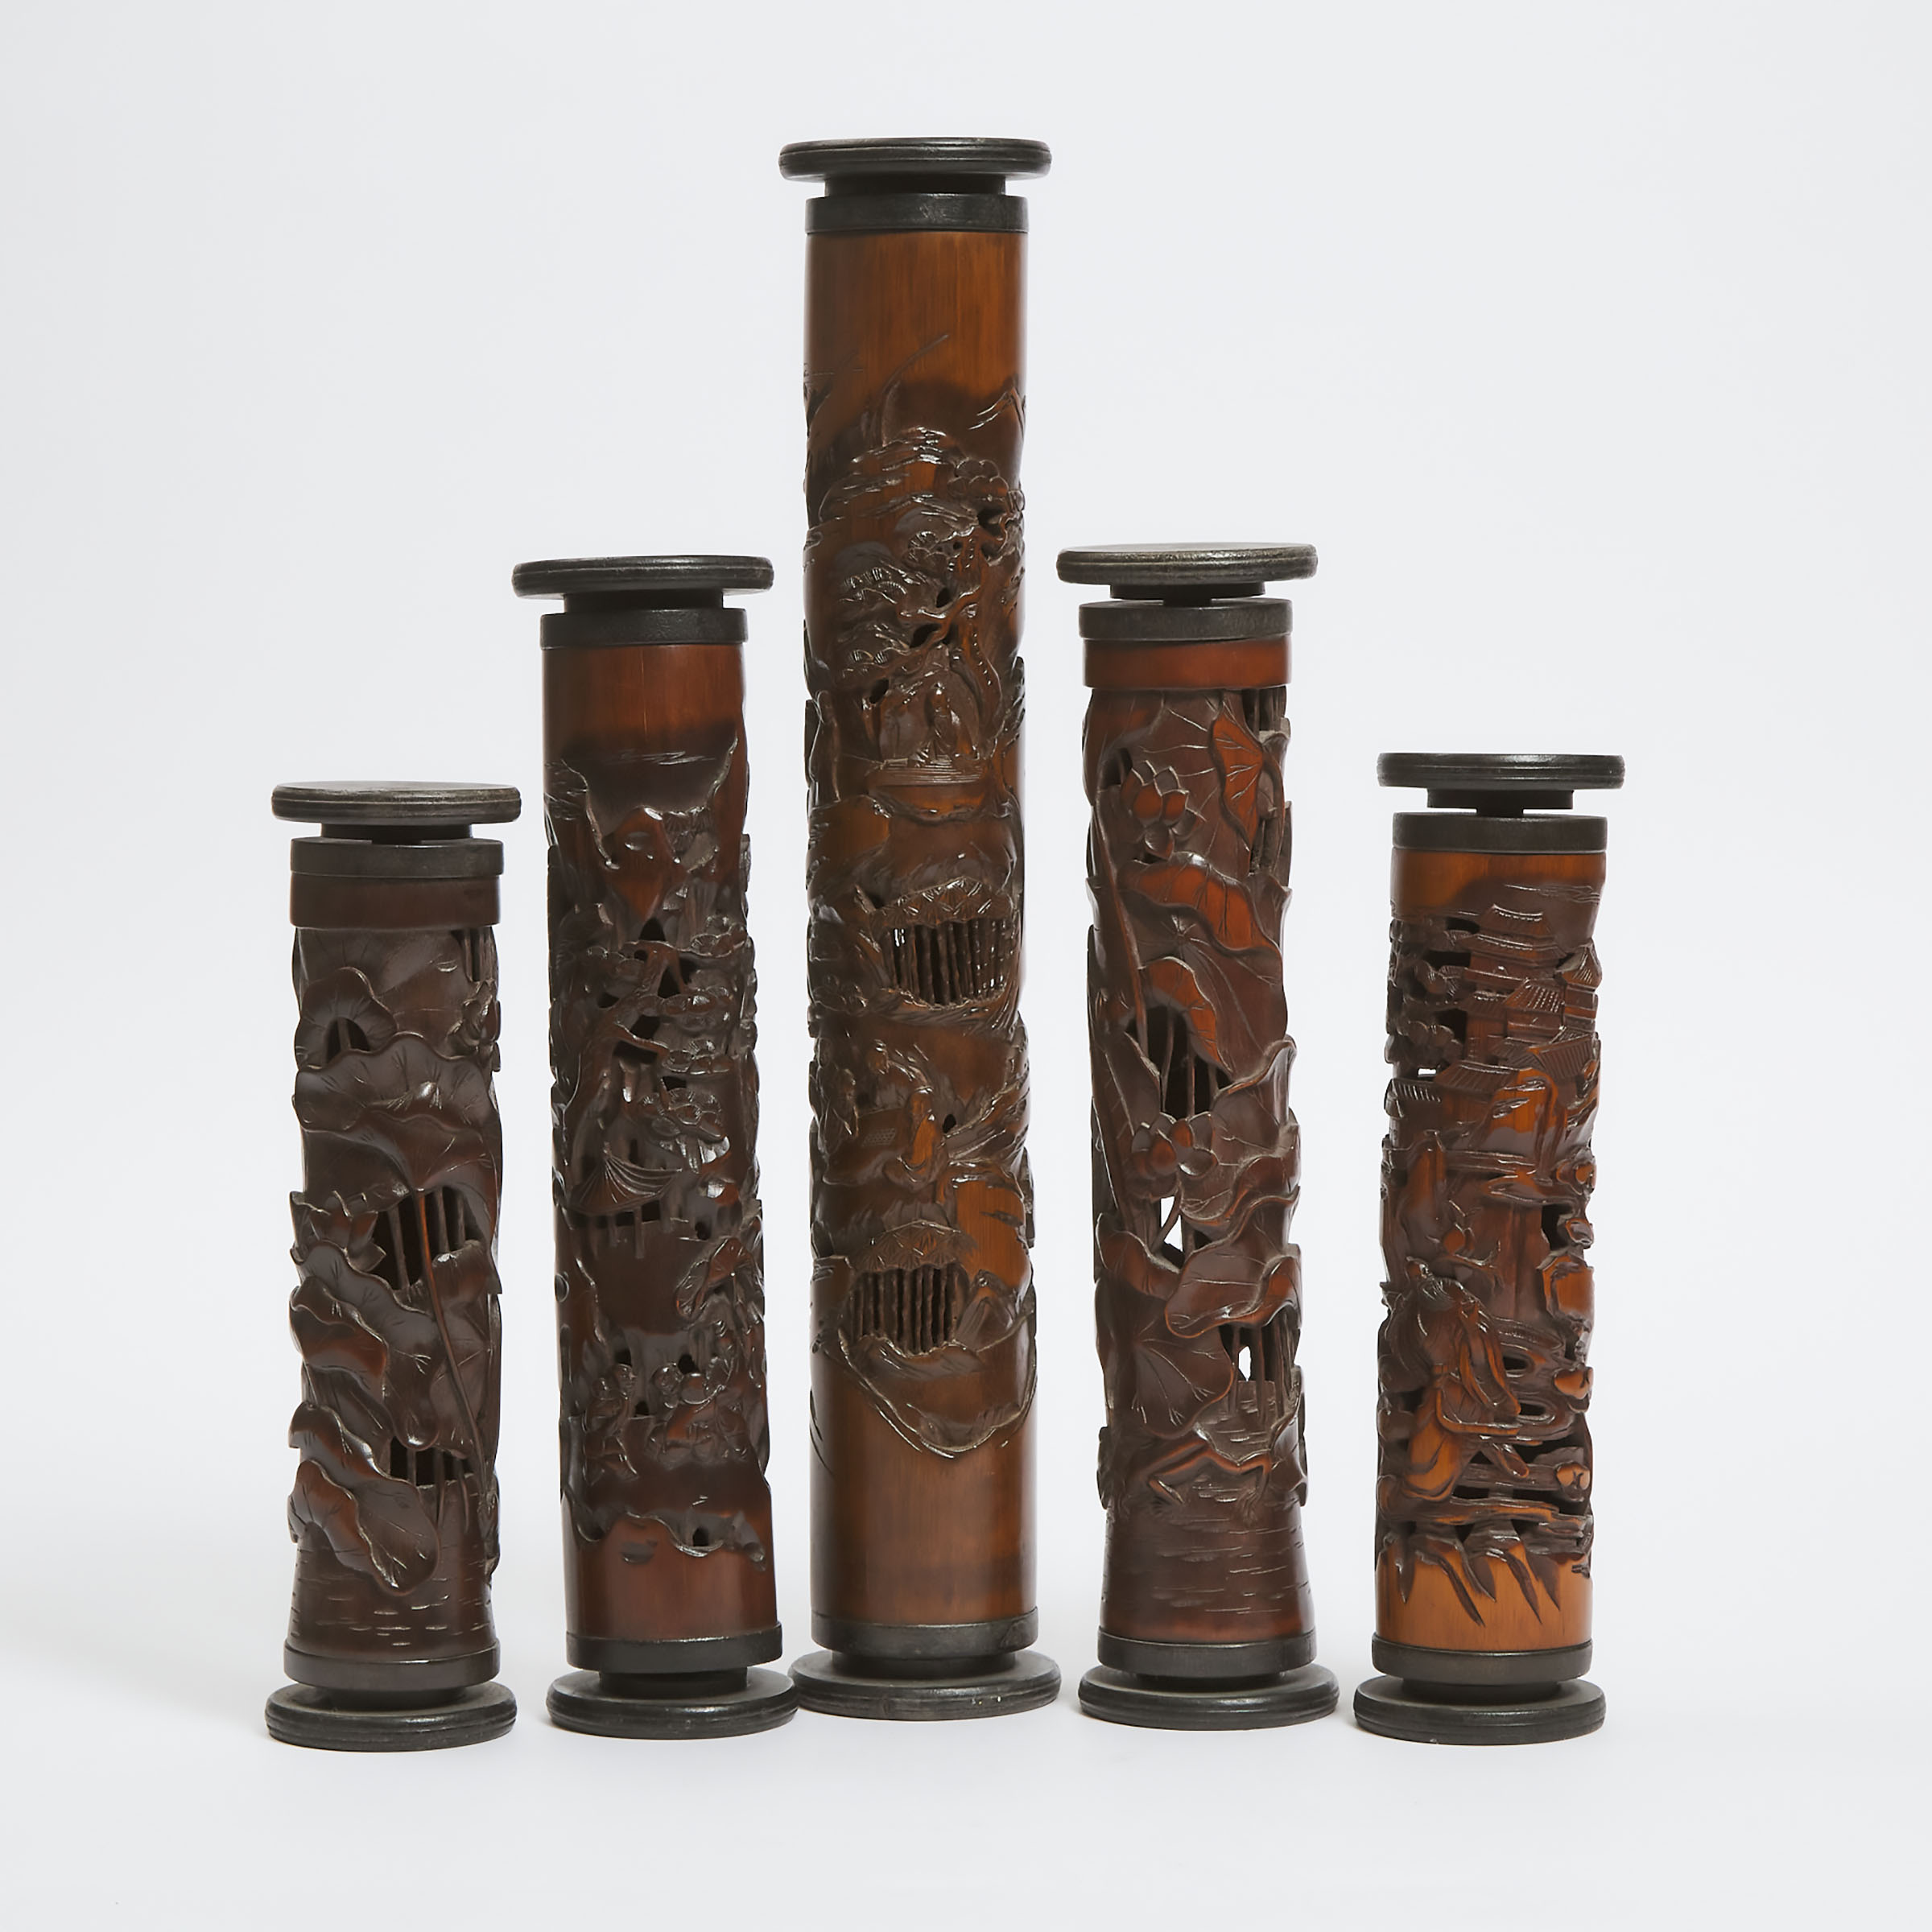 A Group of Five Carved Bamboo Incense Holders, Mid to Late 20th Century